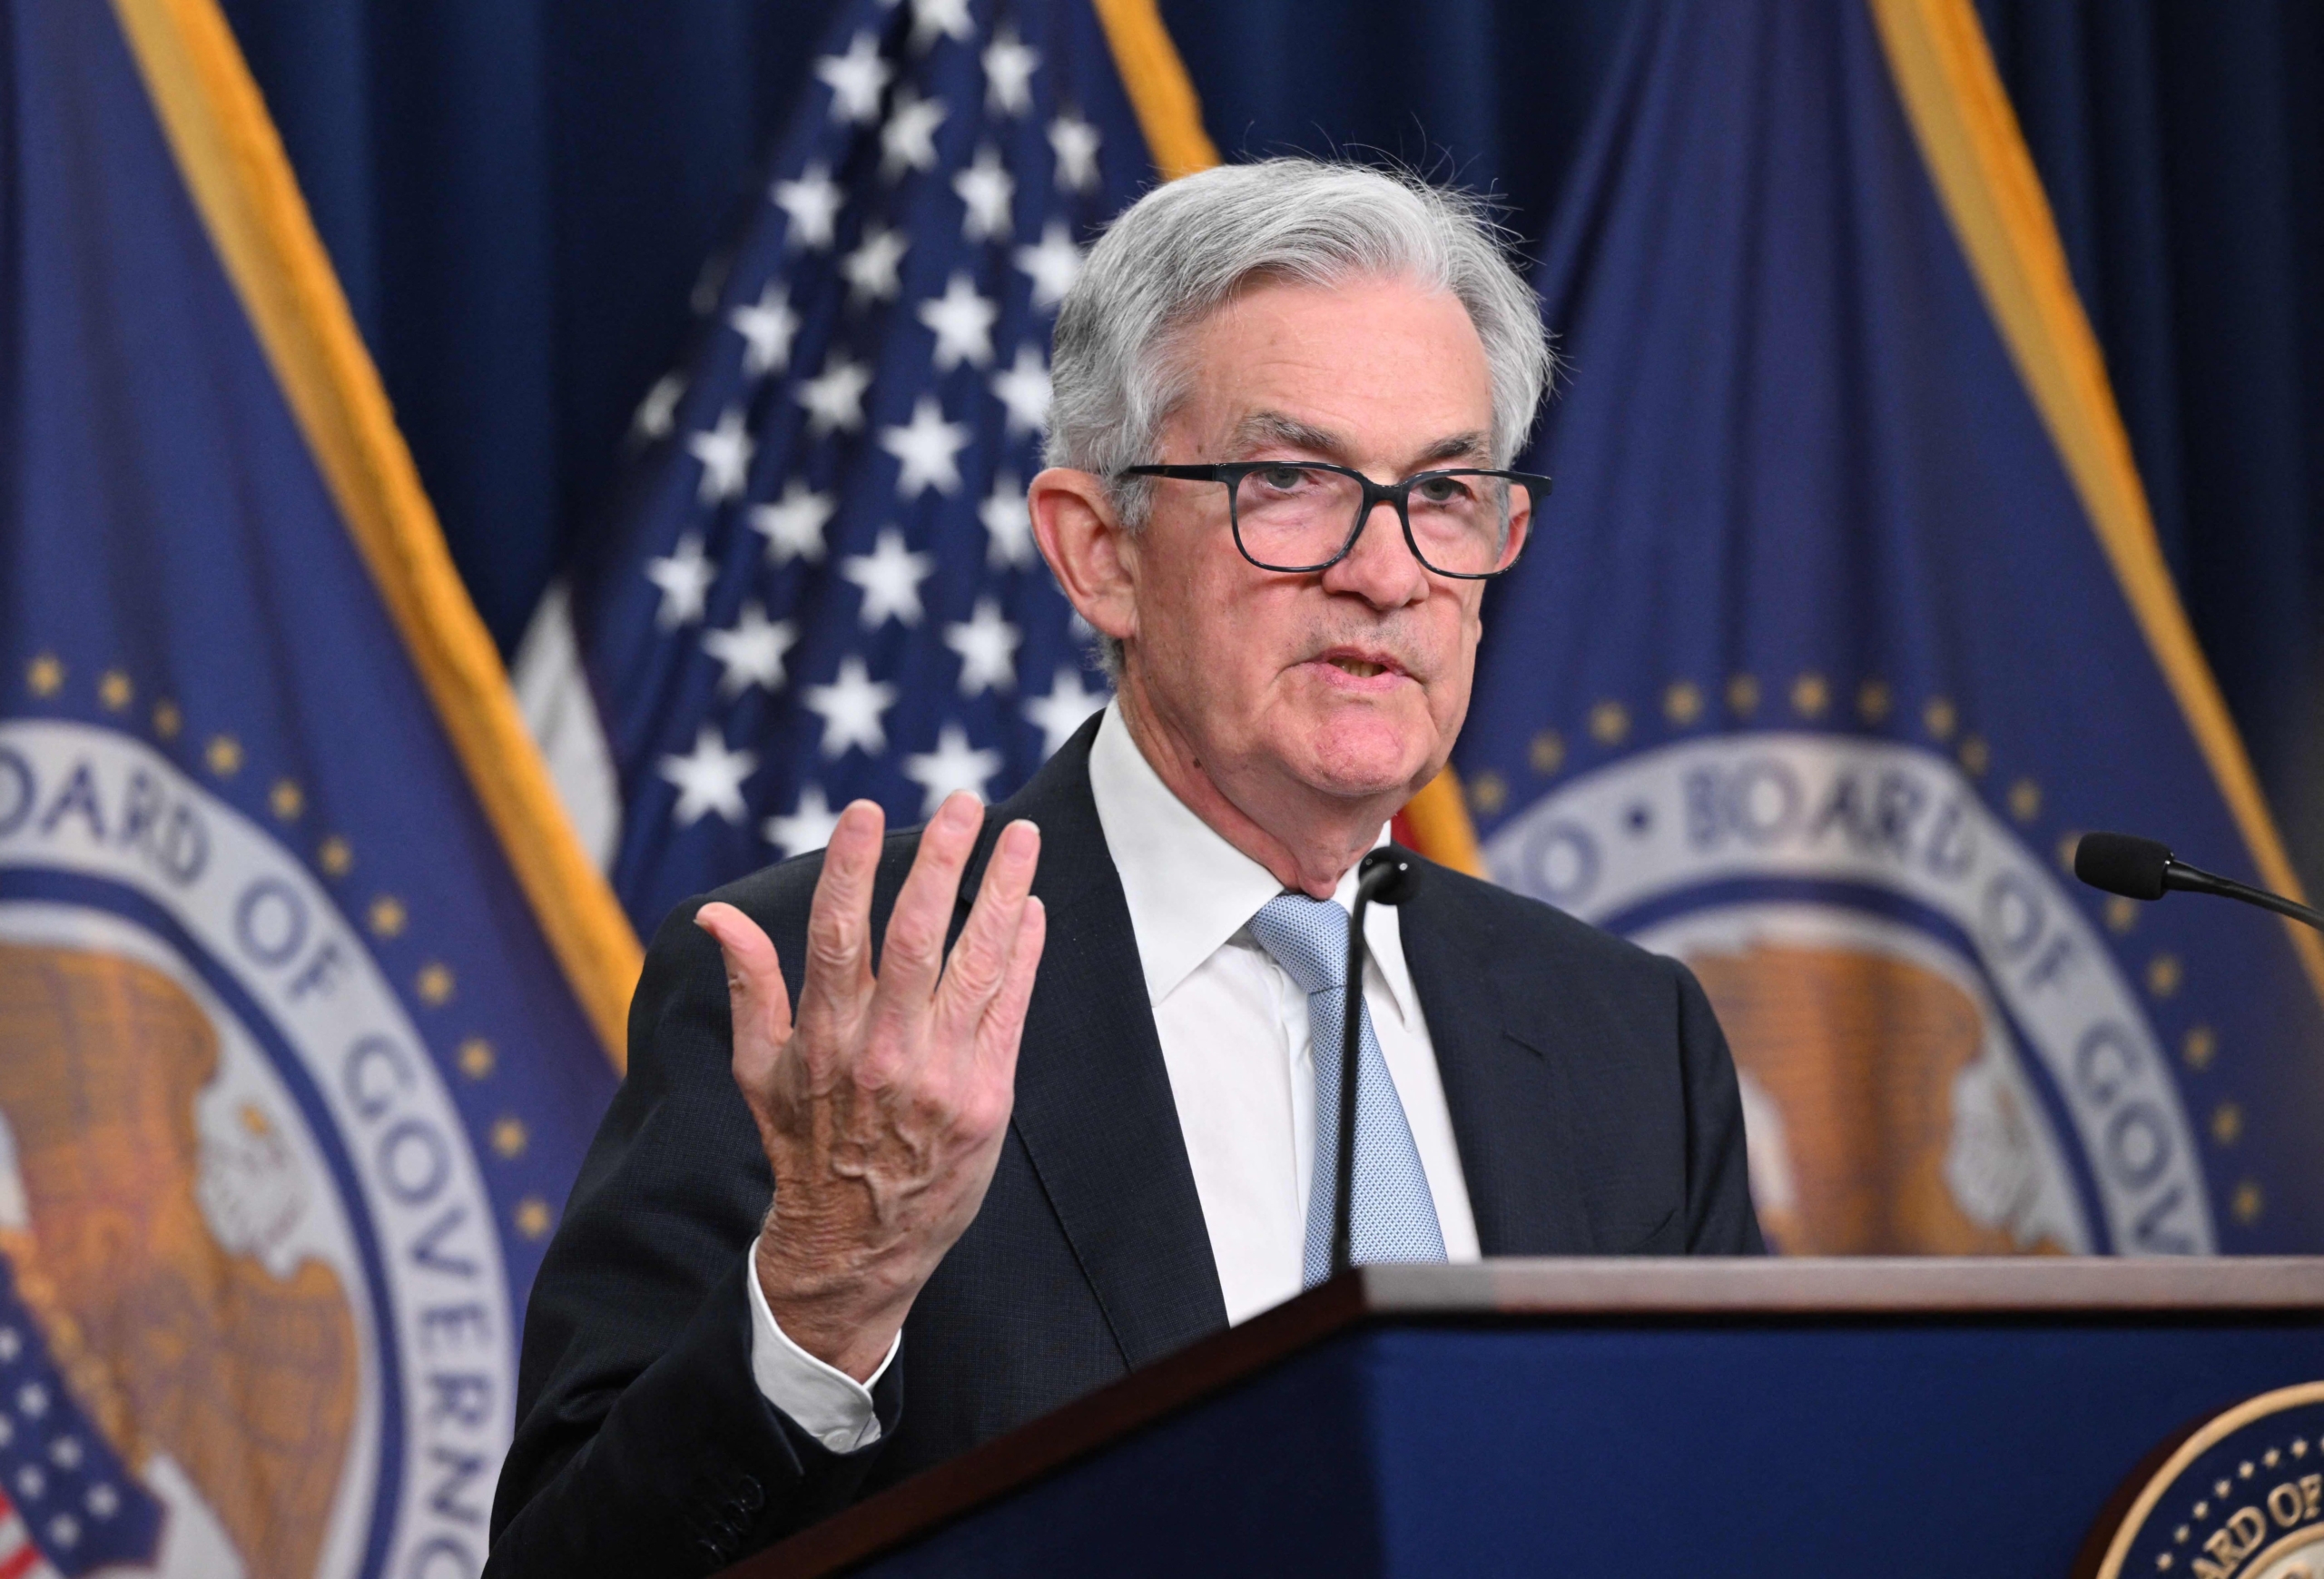 LIVE 1:30 PM ET: Federal Reserve Chair Speaks at Brookings Institution Event on Economic Outlook